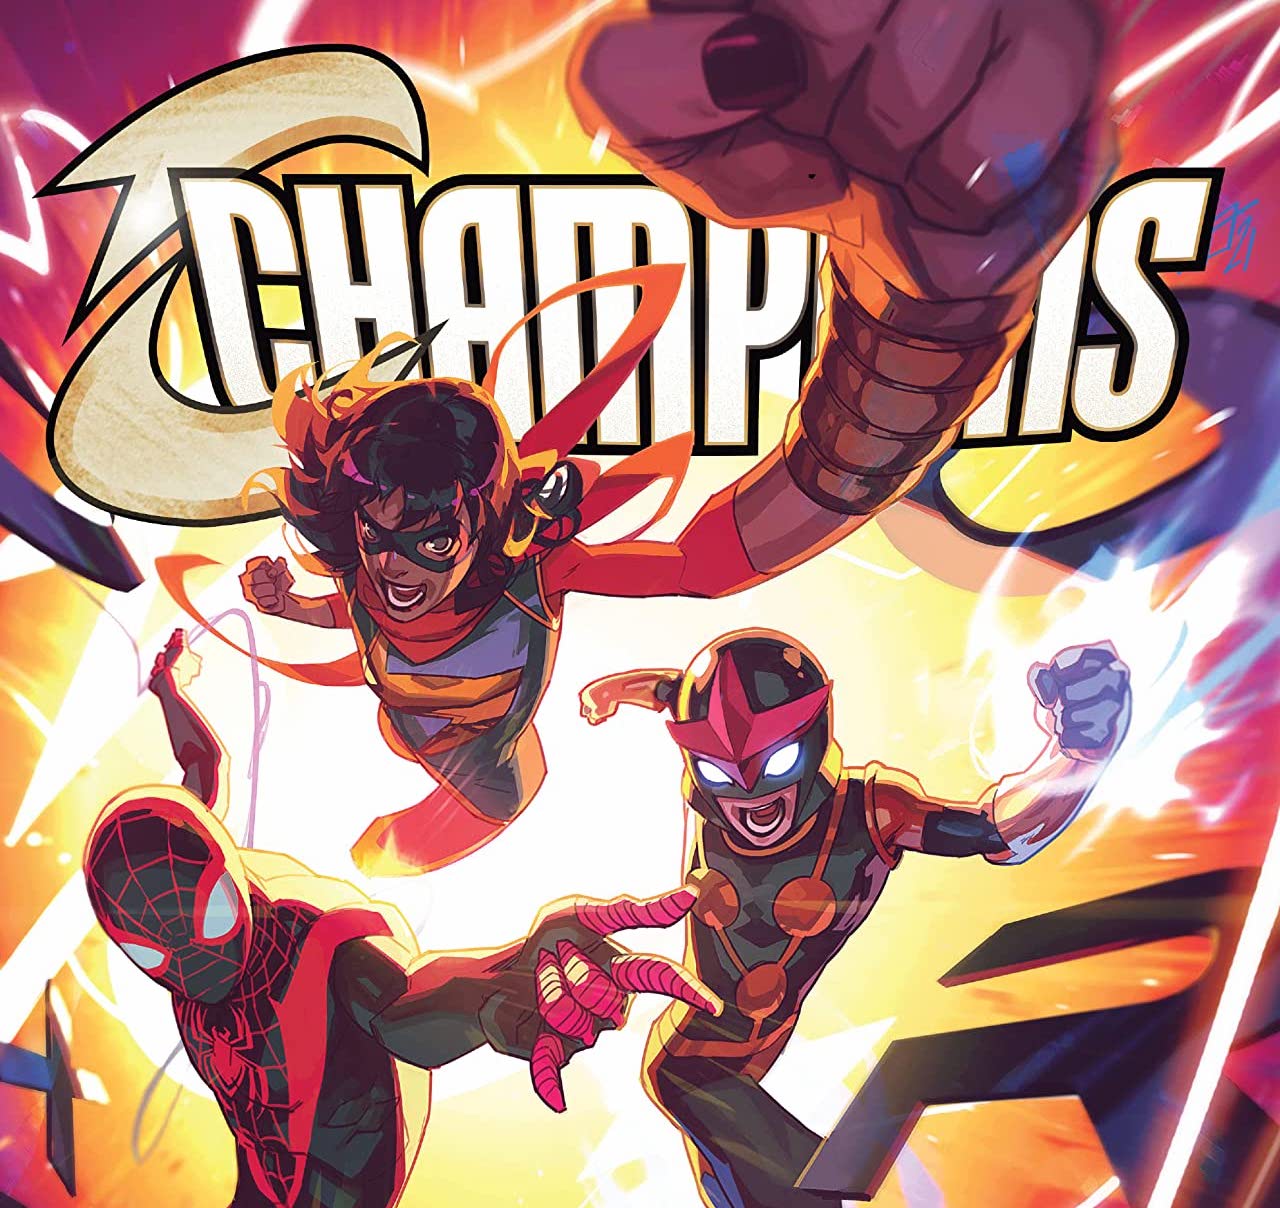 'Champions Vol. 2: Killer App' offers great character writing